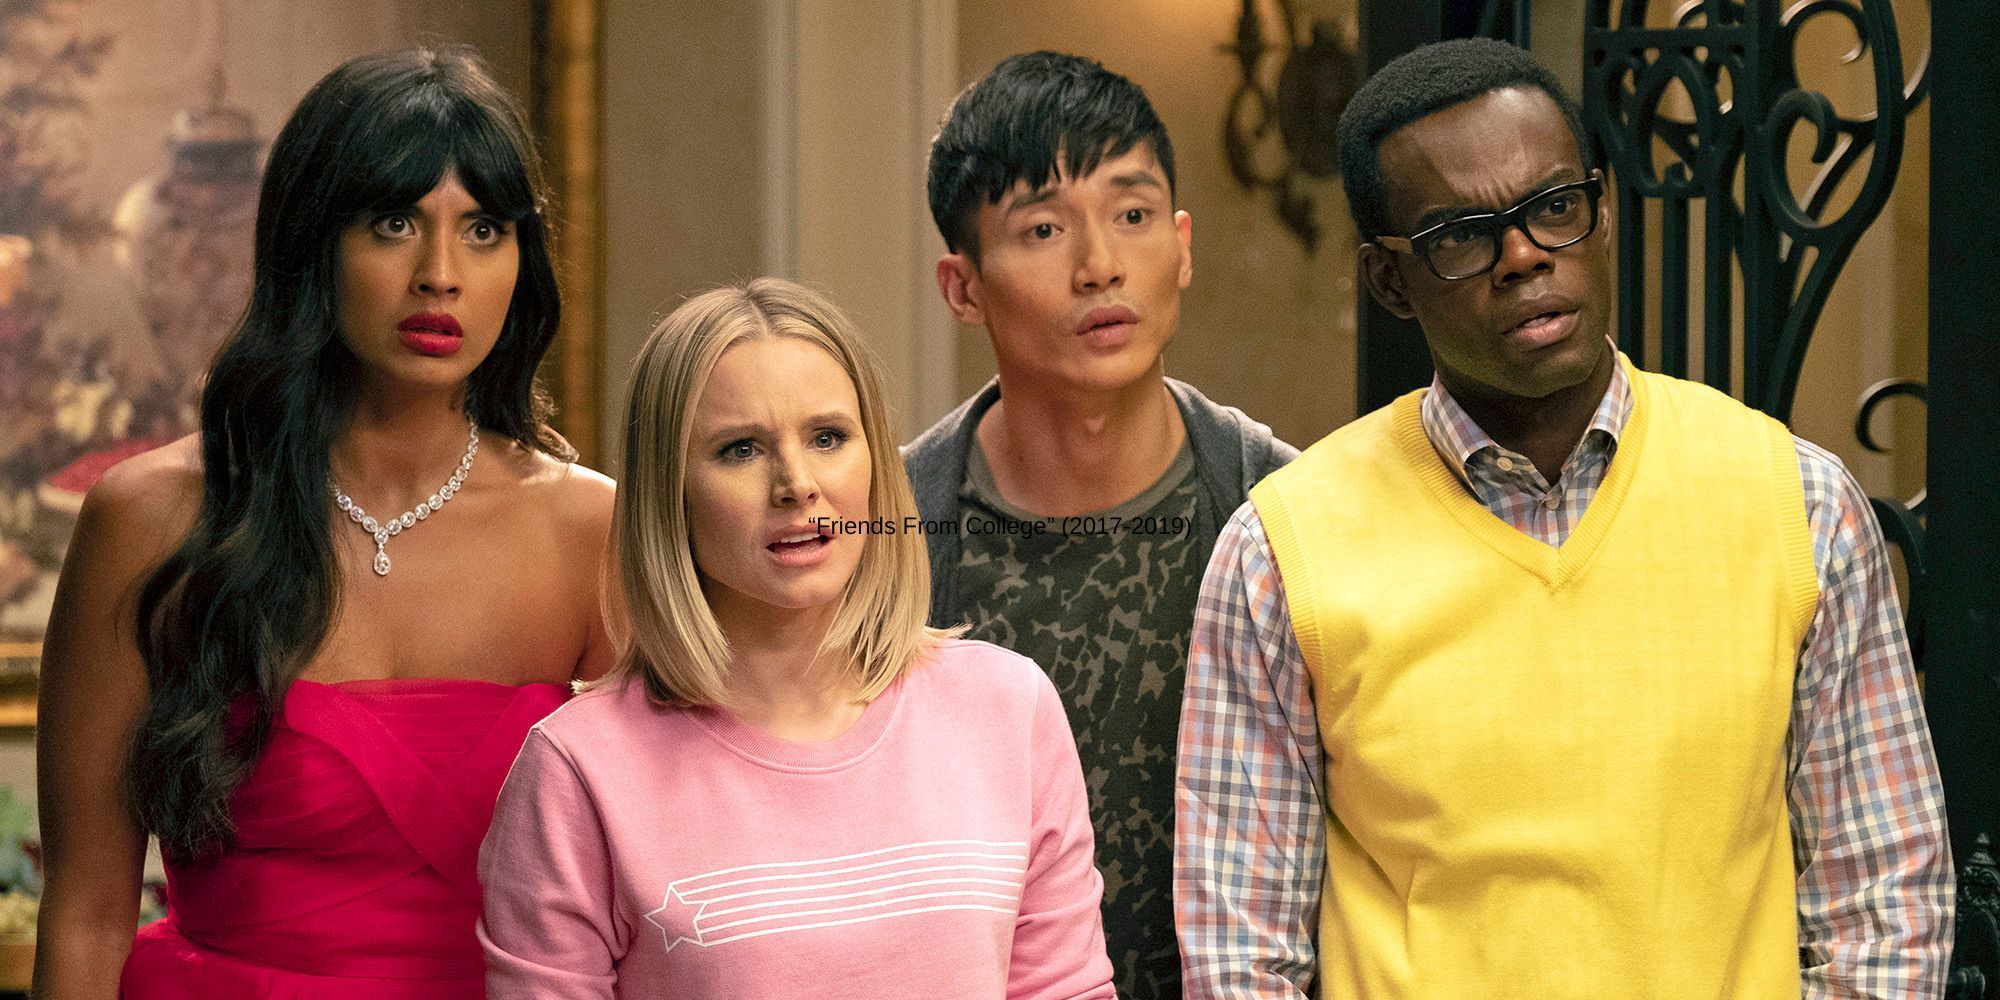 A still from "The Good Place” (2016-2019)